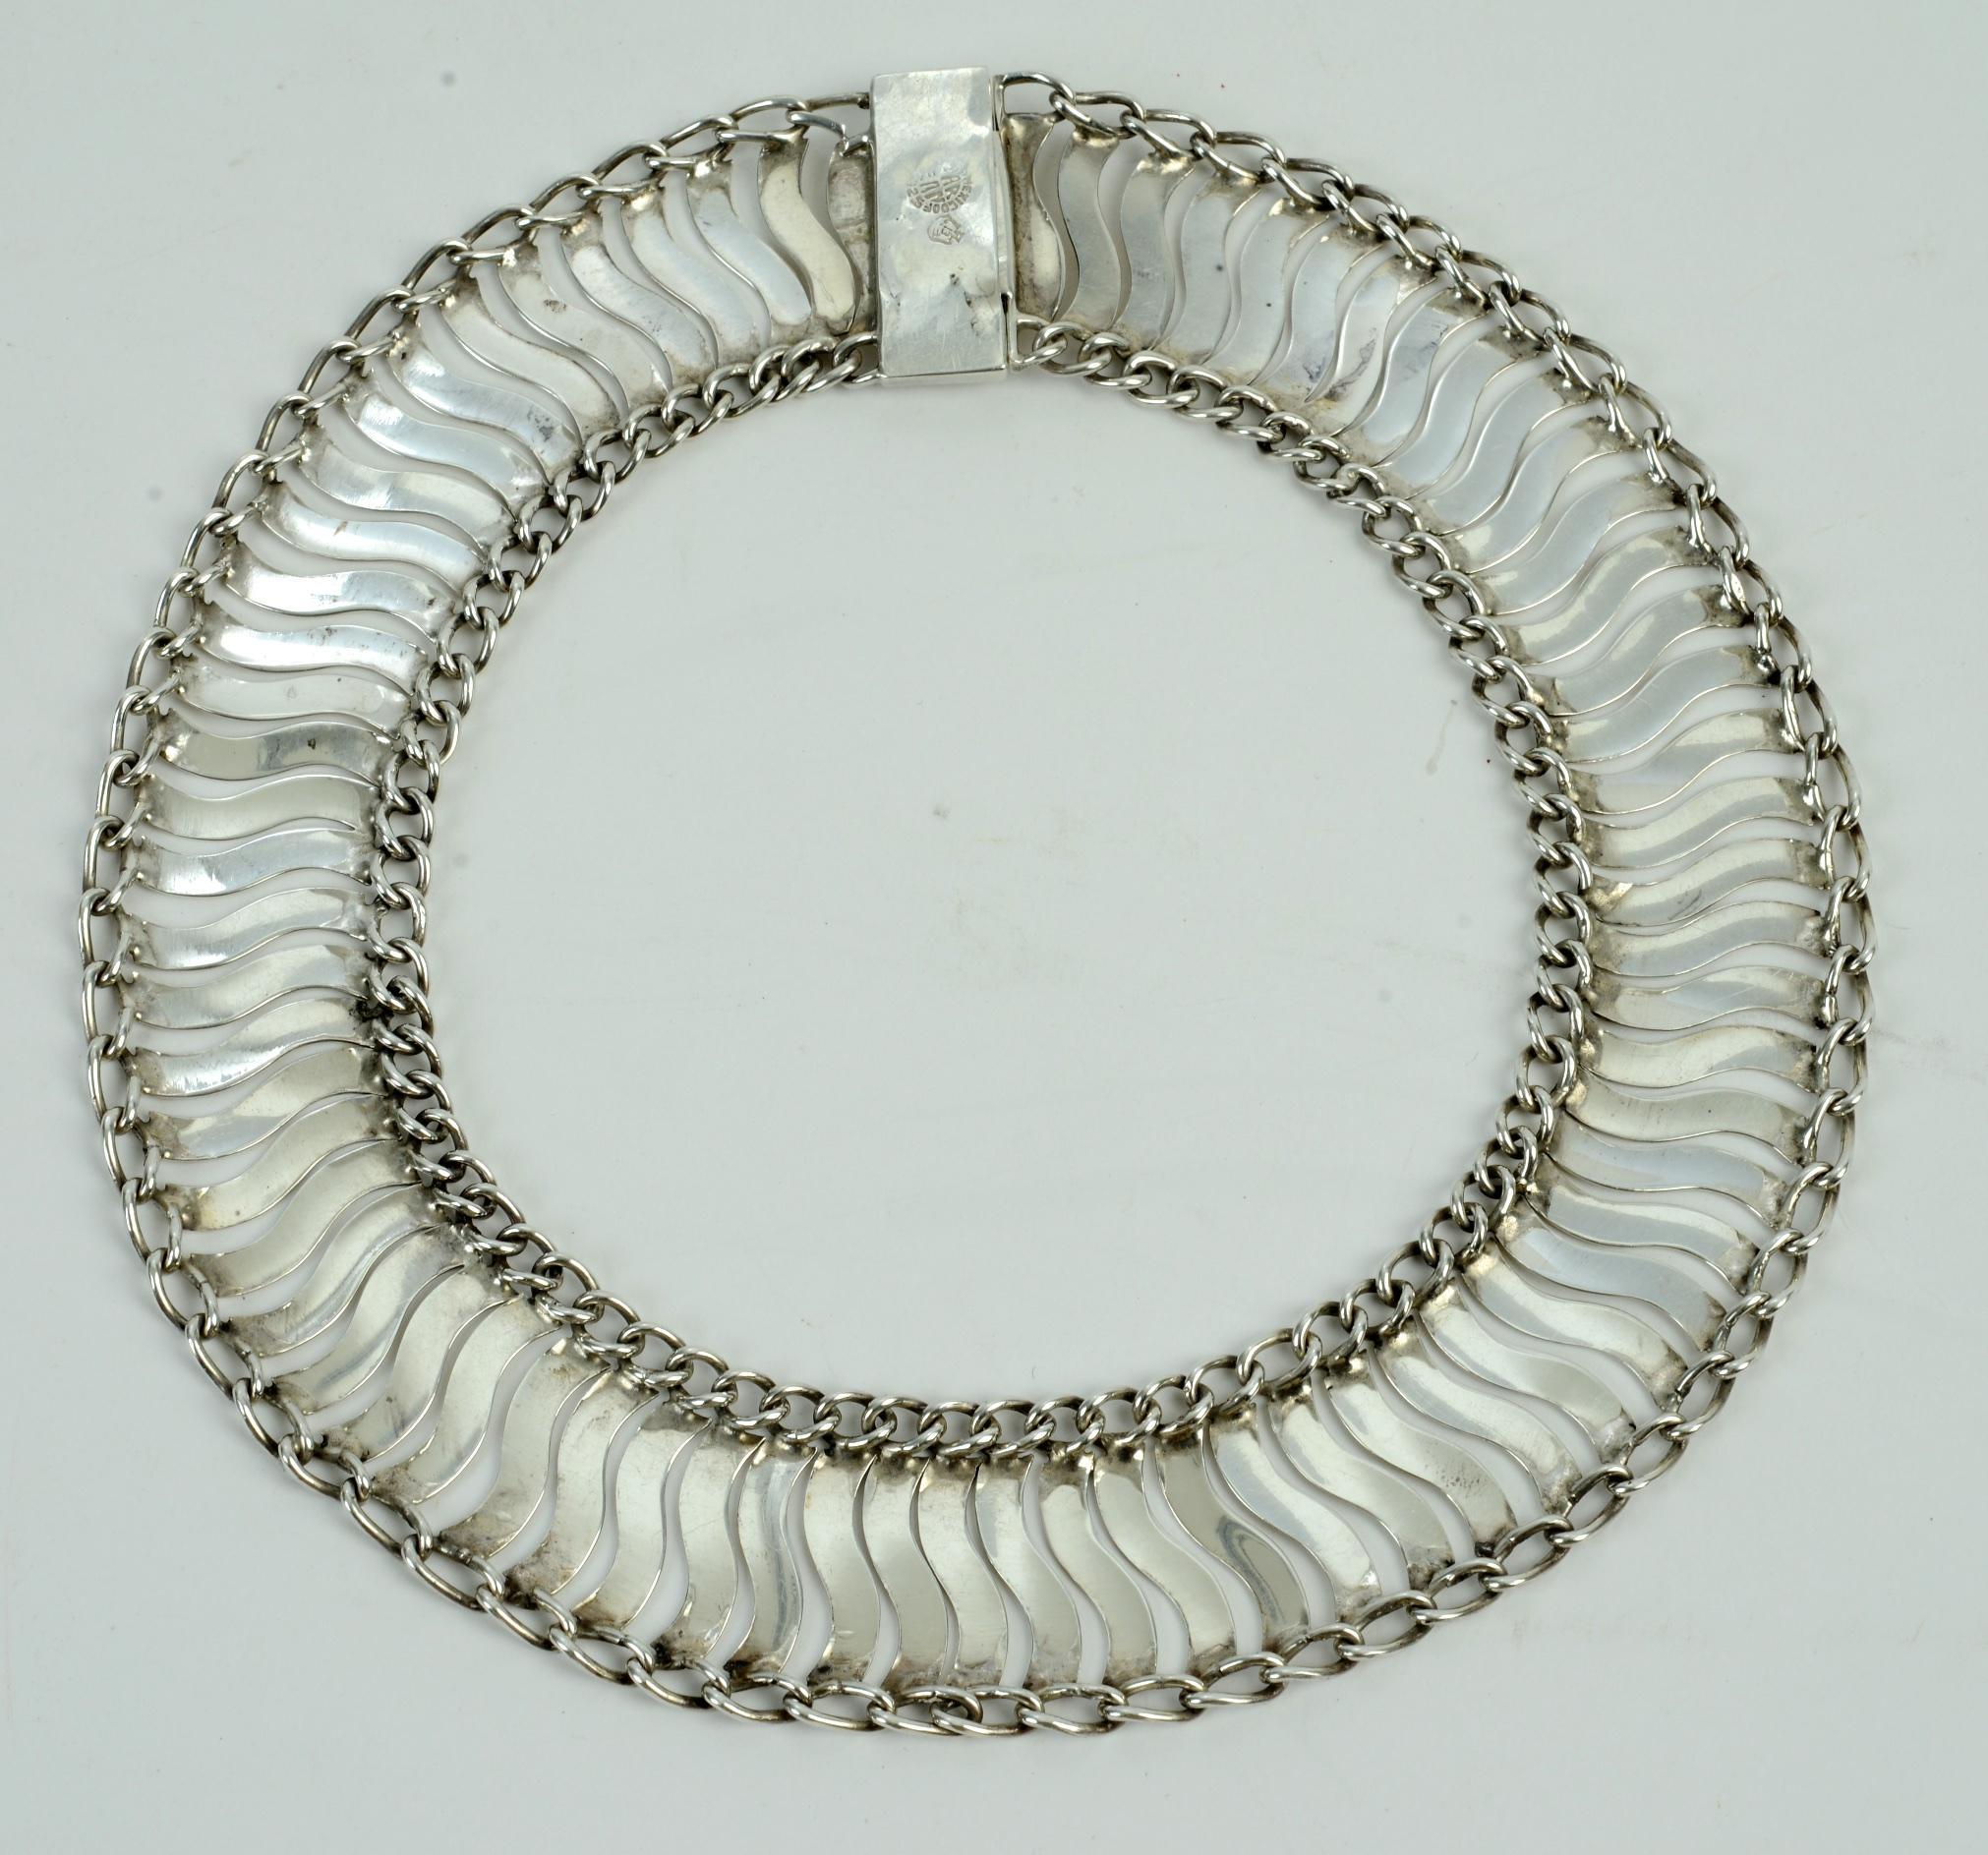 Mexican Sterling Silver Linked Wave Necklace by Plateria FarFan, c1950. 